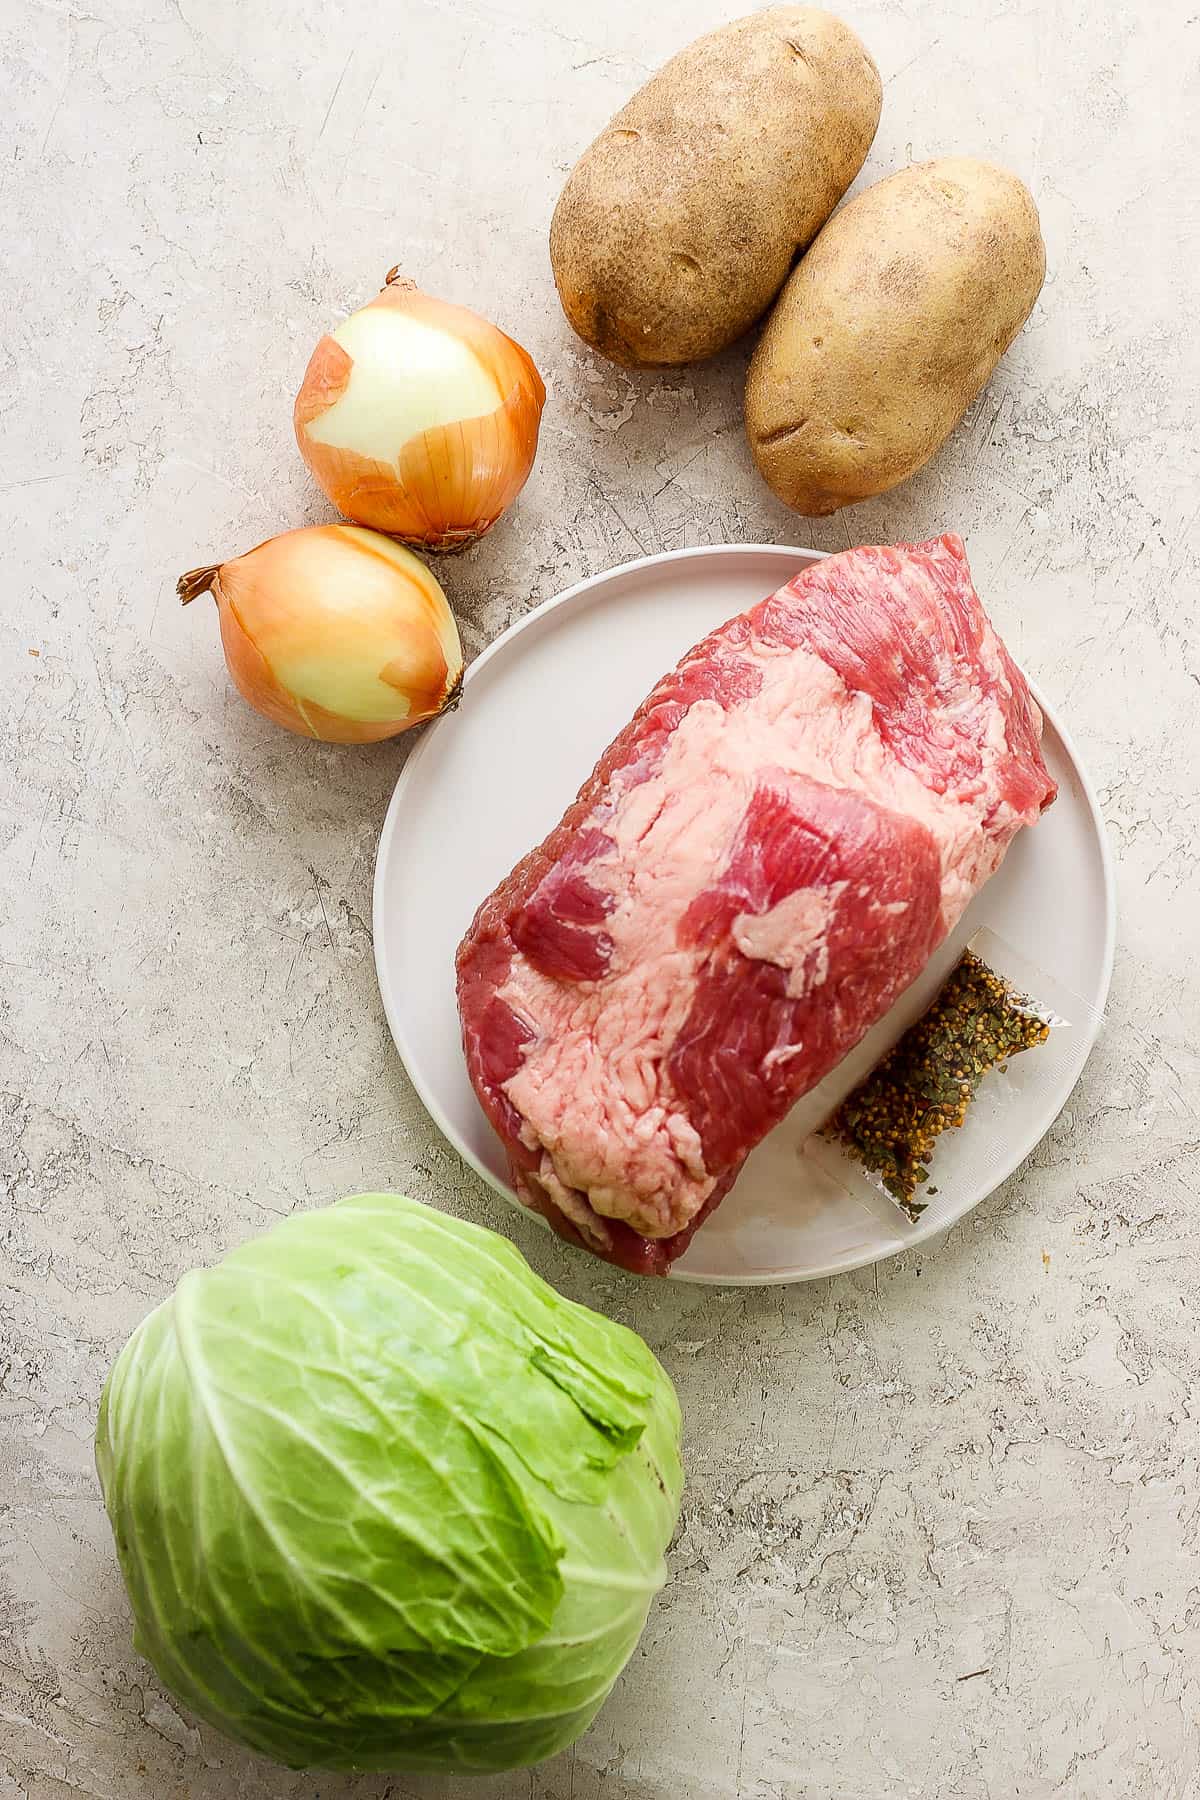 The ingredients for Instant Pot corned beef and cabbage on the counter.